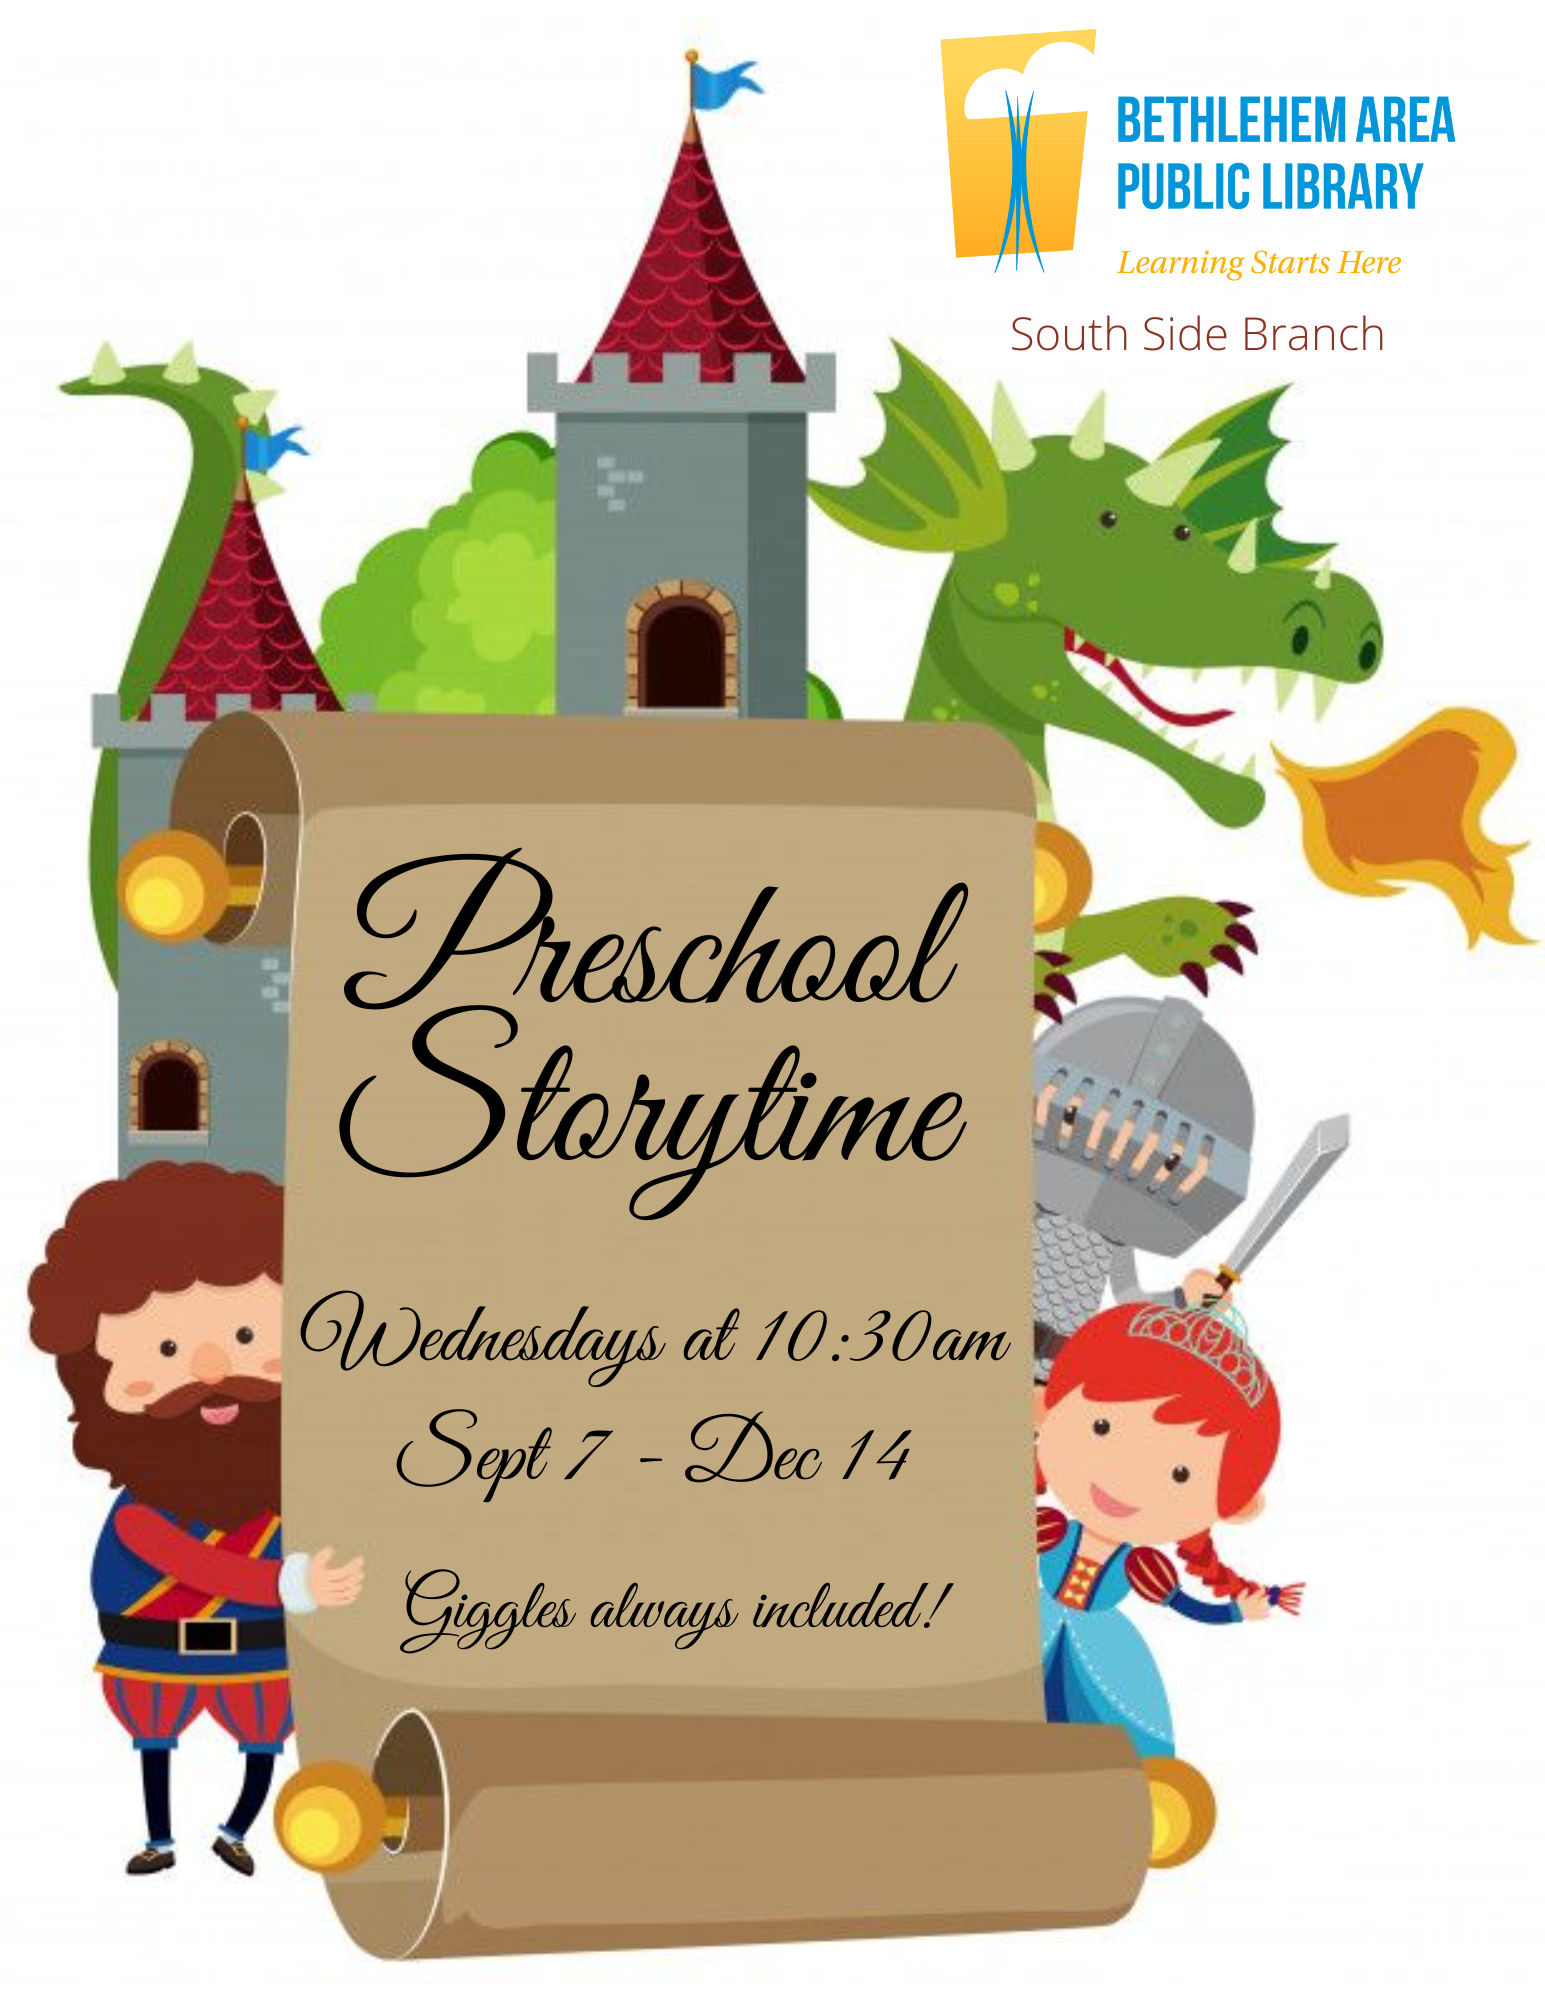 join us for storytime!